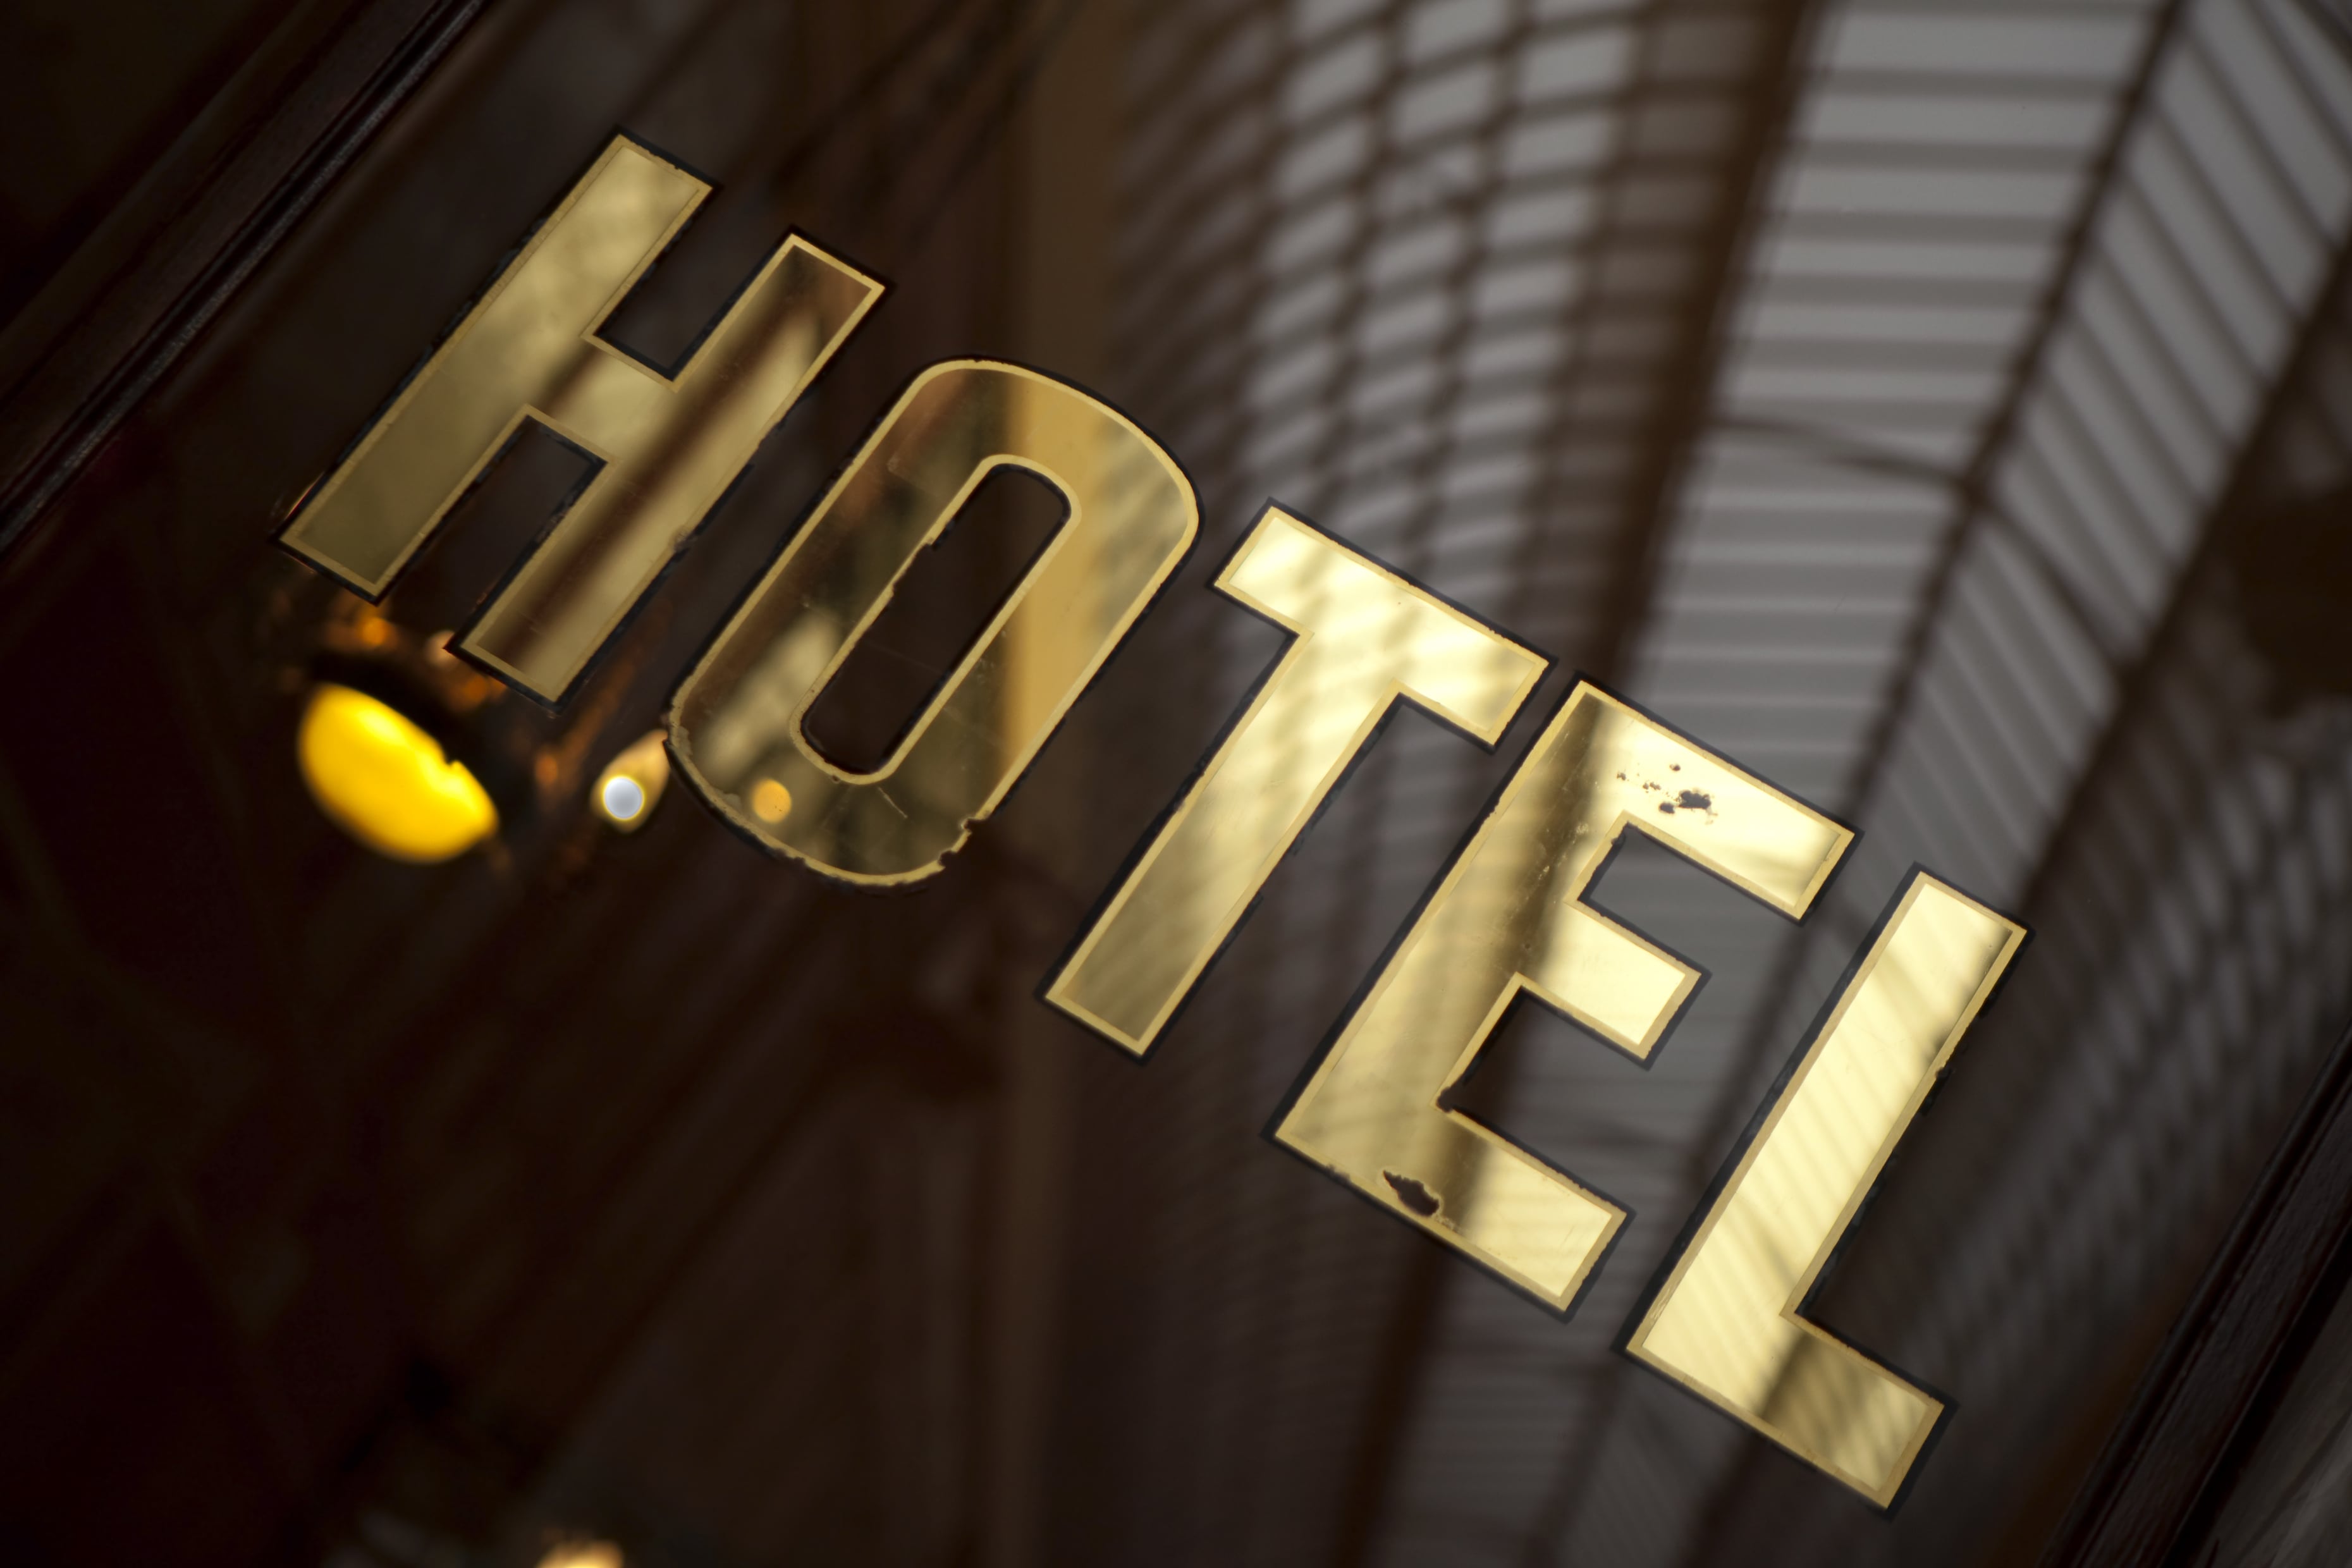 Hotel occupancy in the UAE has reached 63%